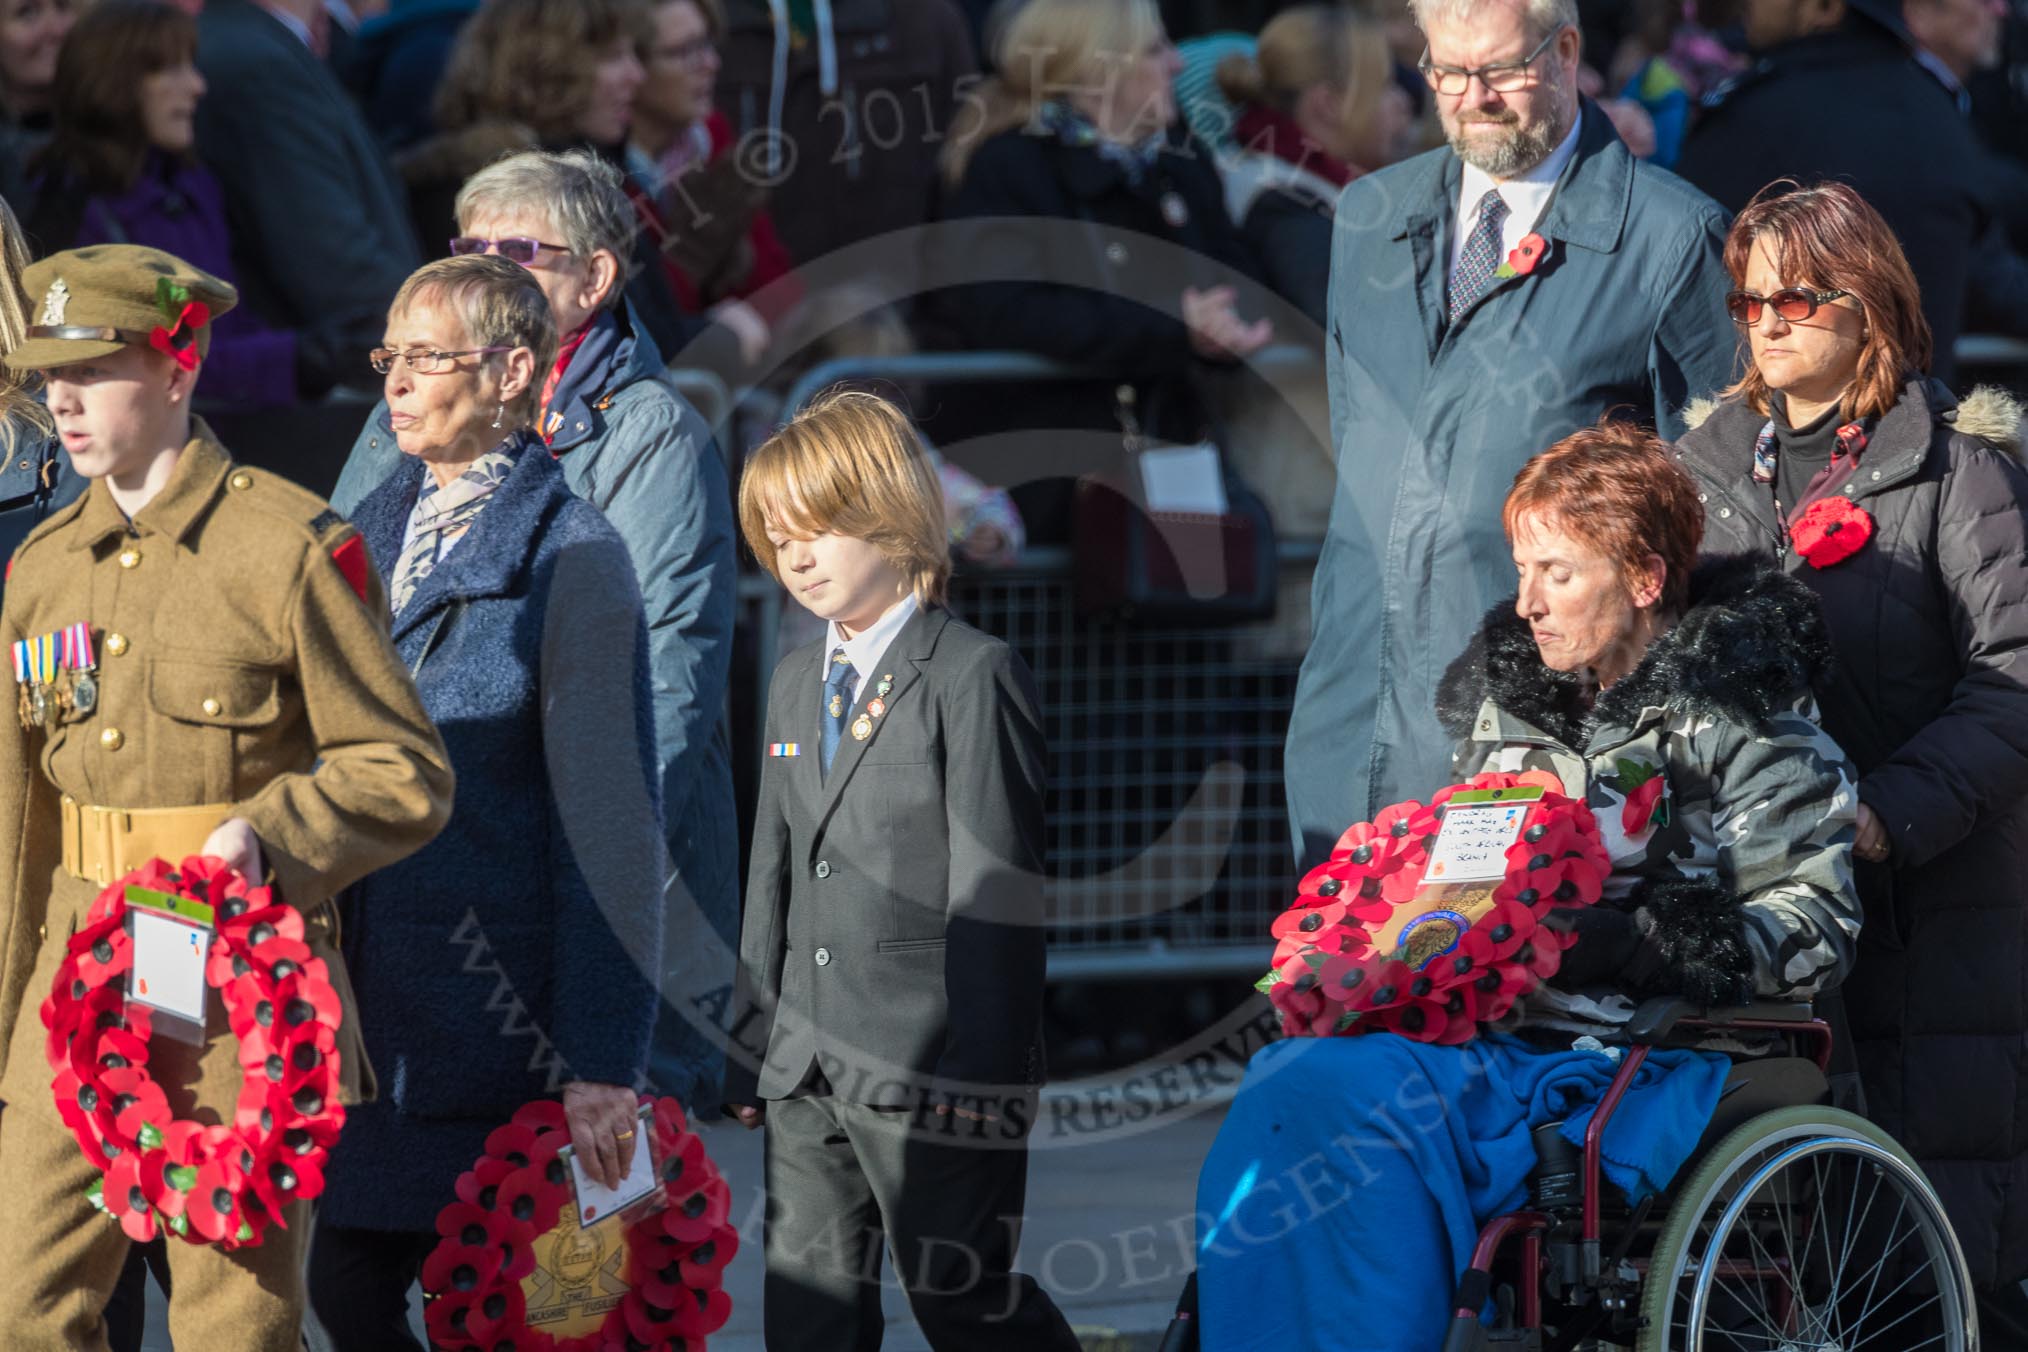 March Past, Remembrance Sunday at the Cenotaph 2016: M22 The Royal British Legion - Civilians.
Cenotaph, Whitehall, London SW1,
London,
Greater London,
United Kingdom,
on 13 November 2016 at 13:16, image #2675